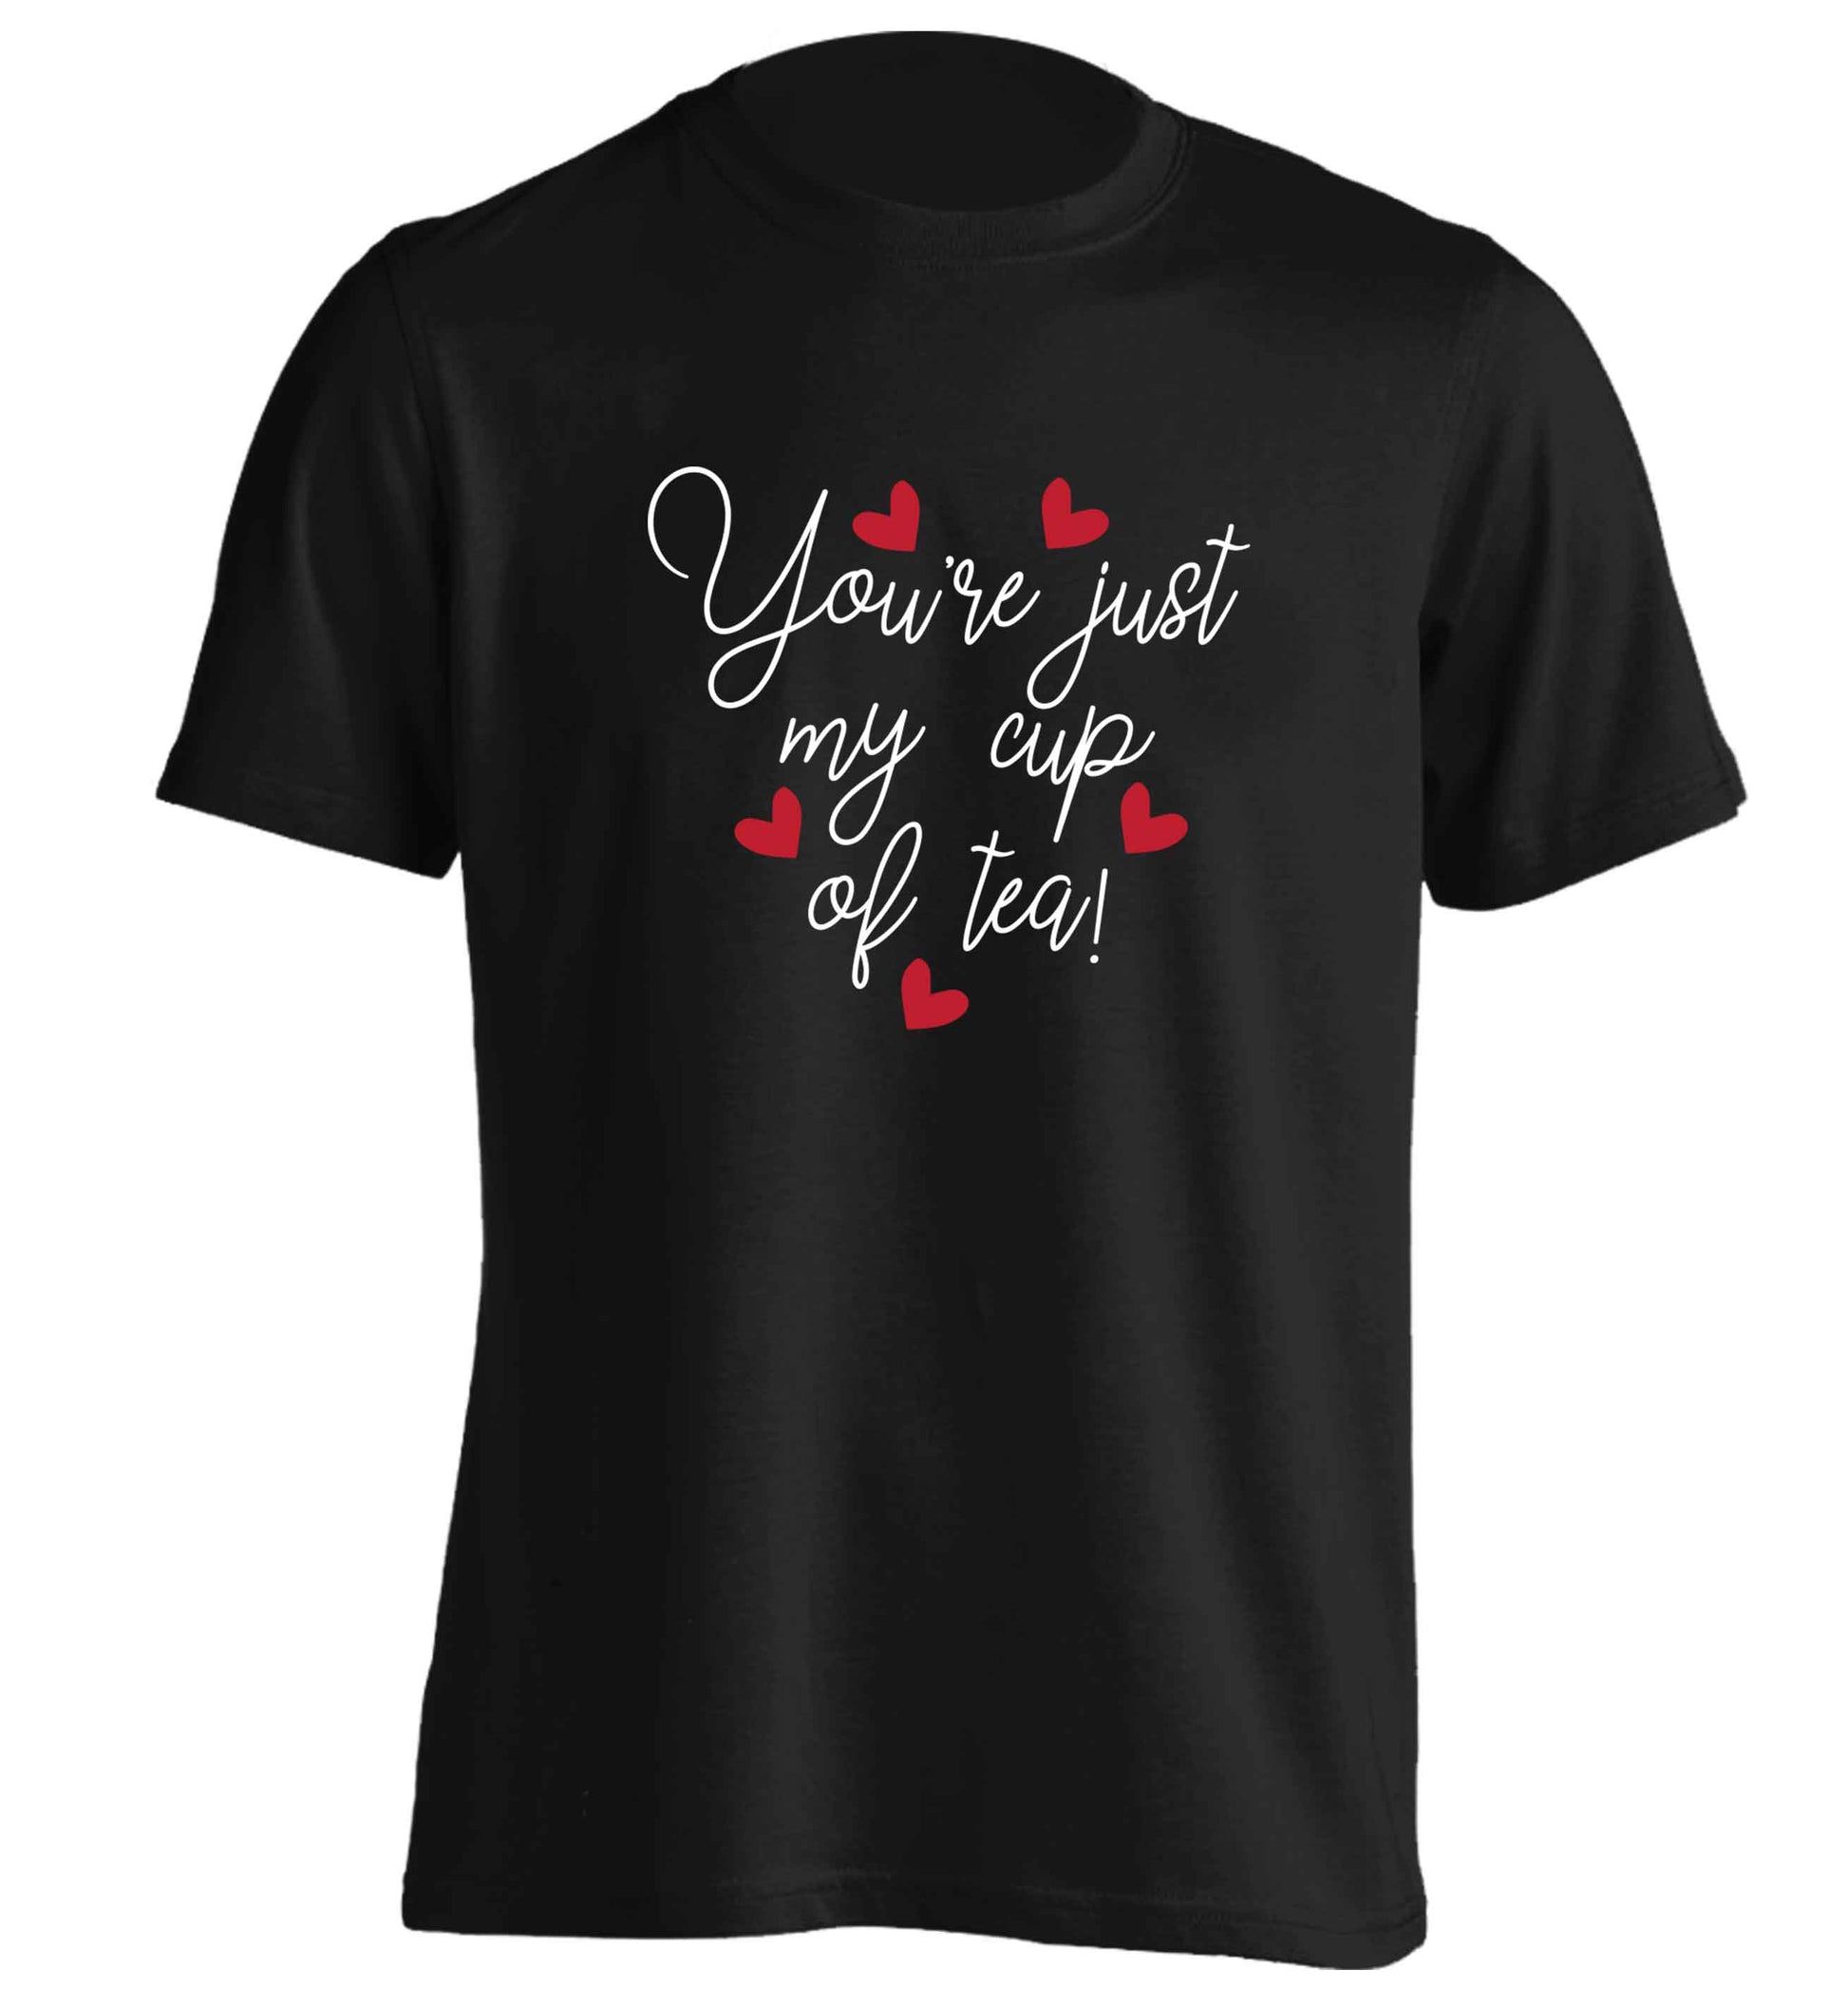 You're just my cup of tea adults unisex black Tshirt 2XL